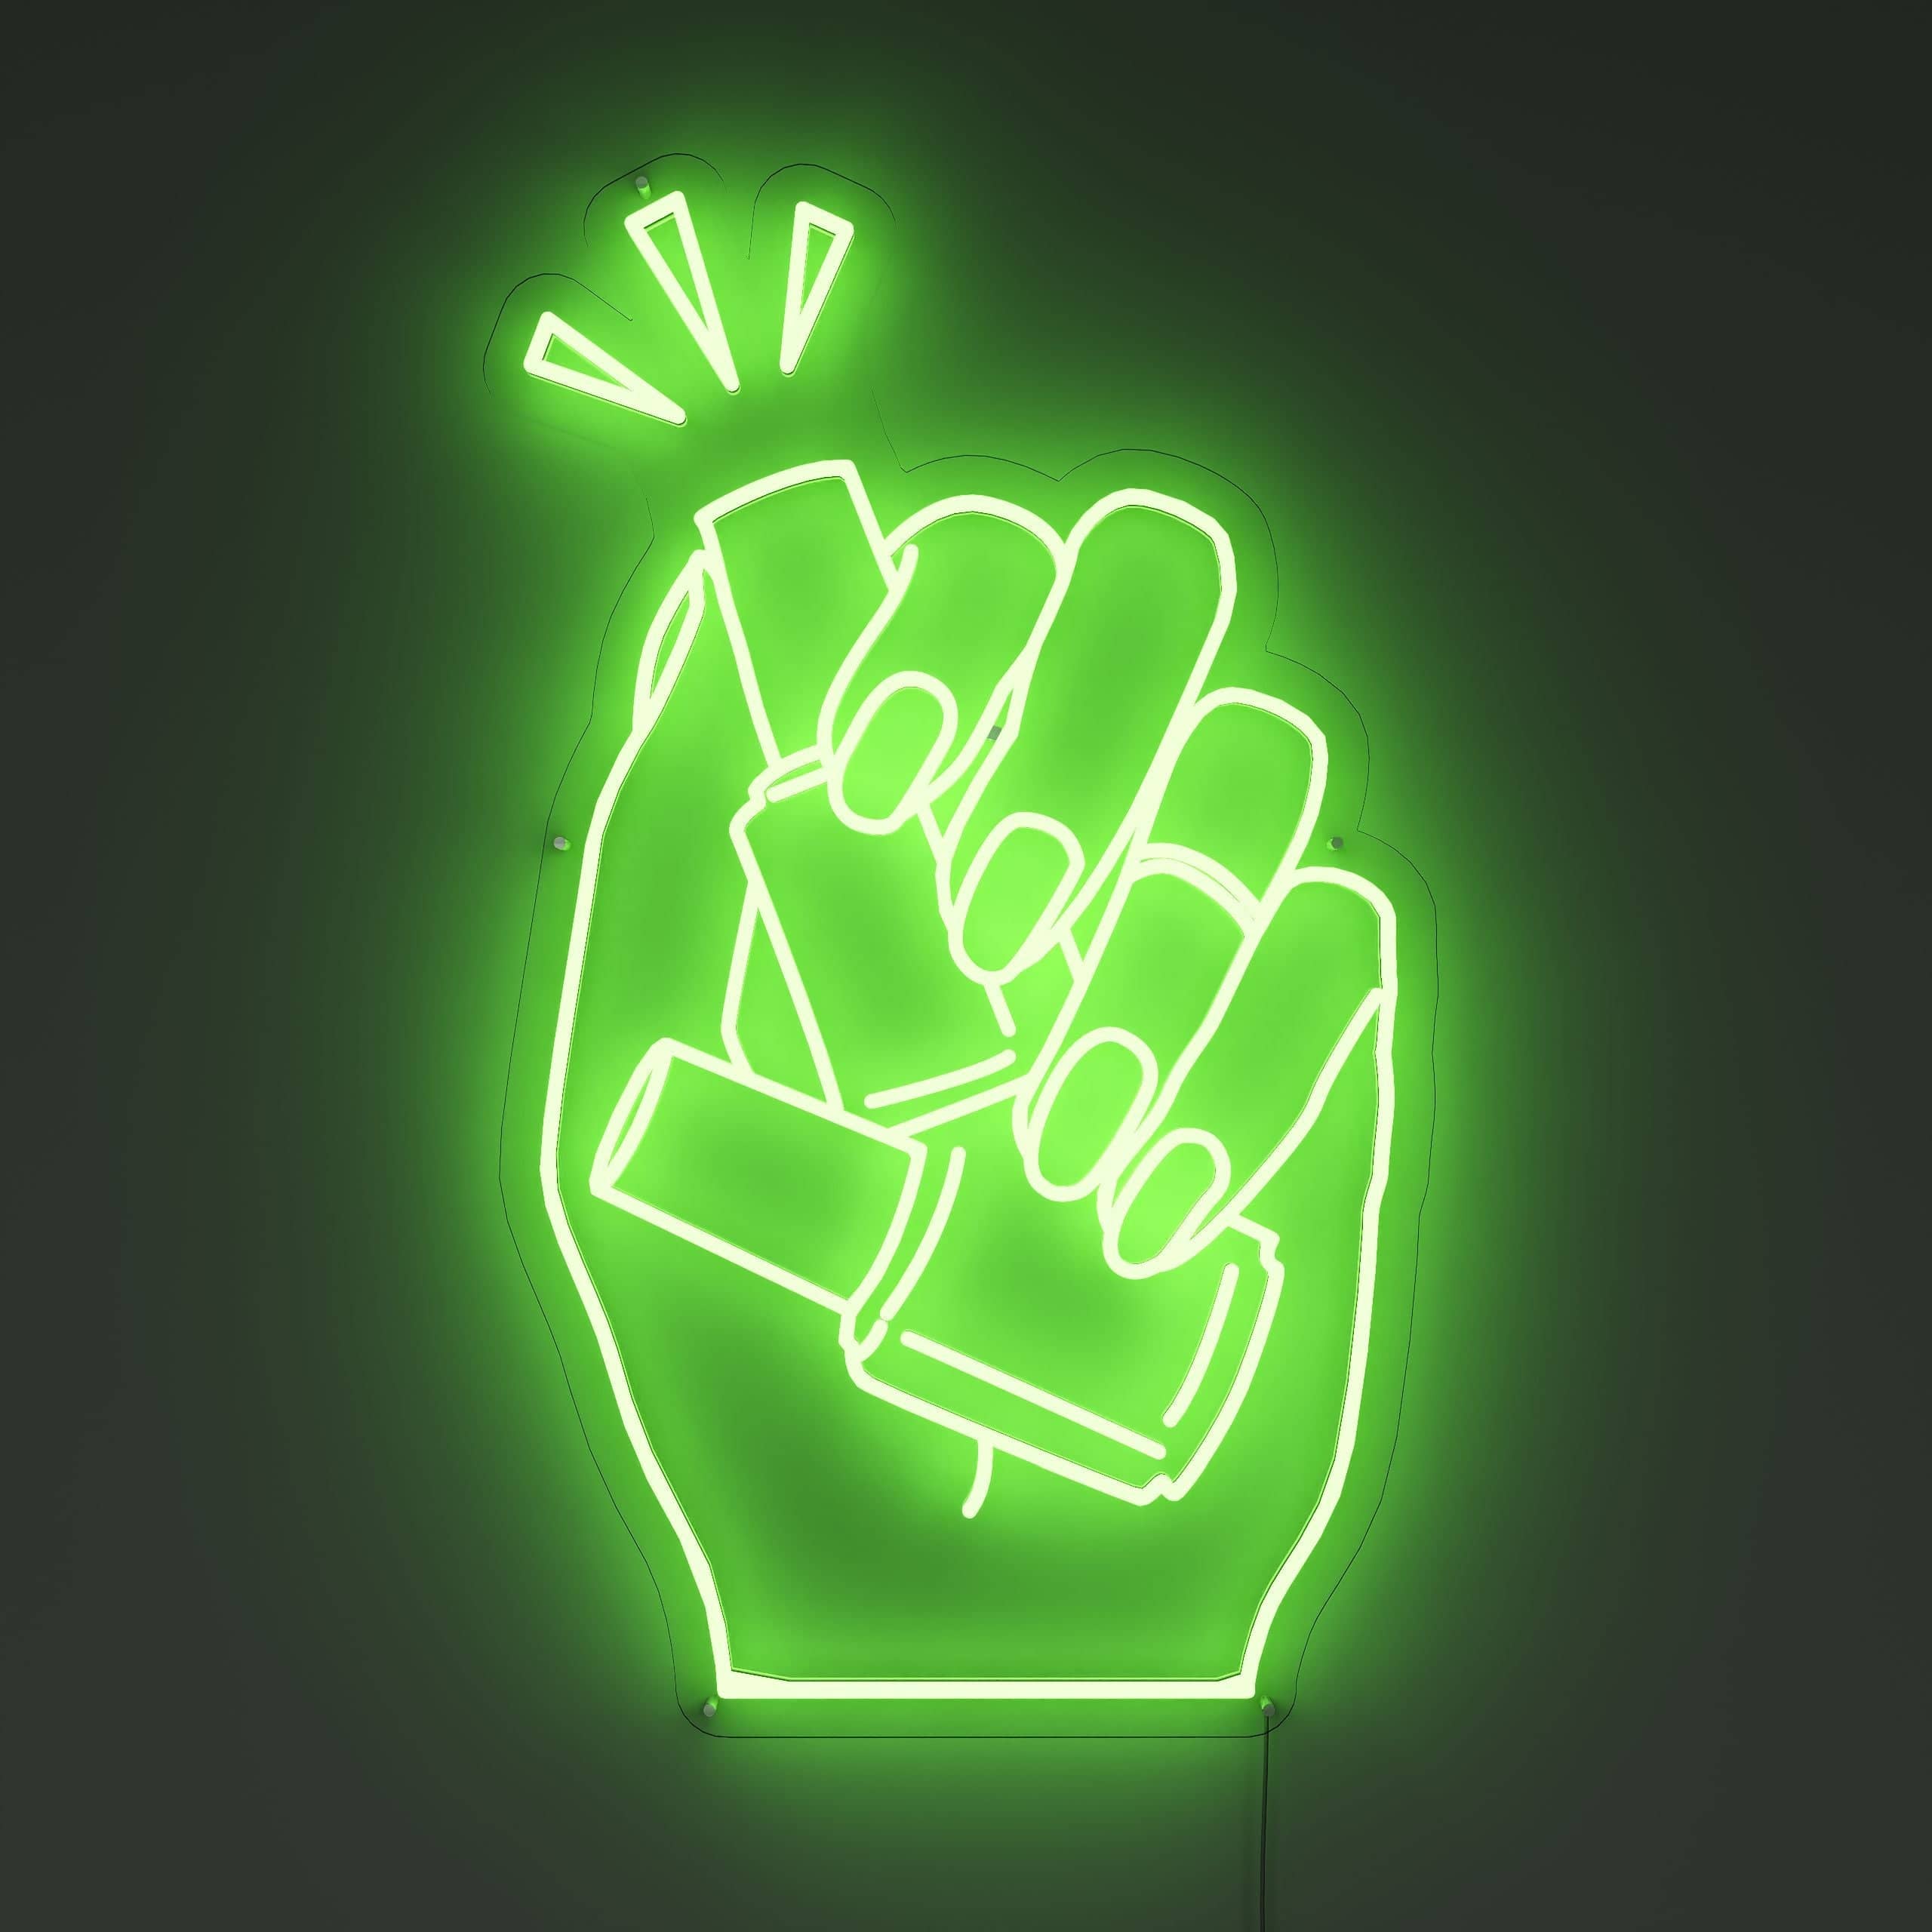 crystal-clear-nail-style-neon-sign-lite